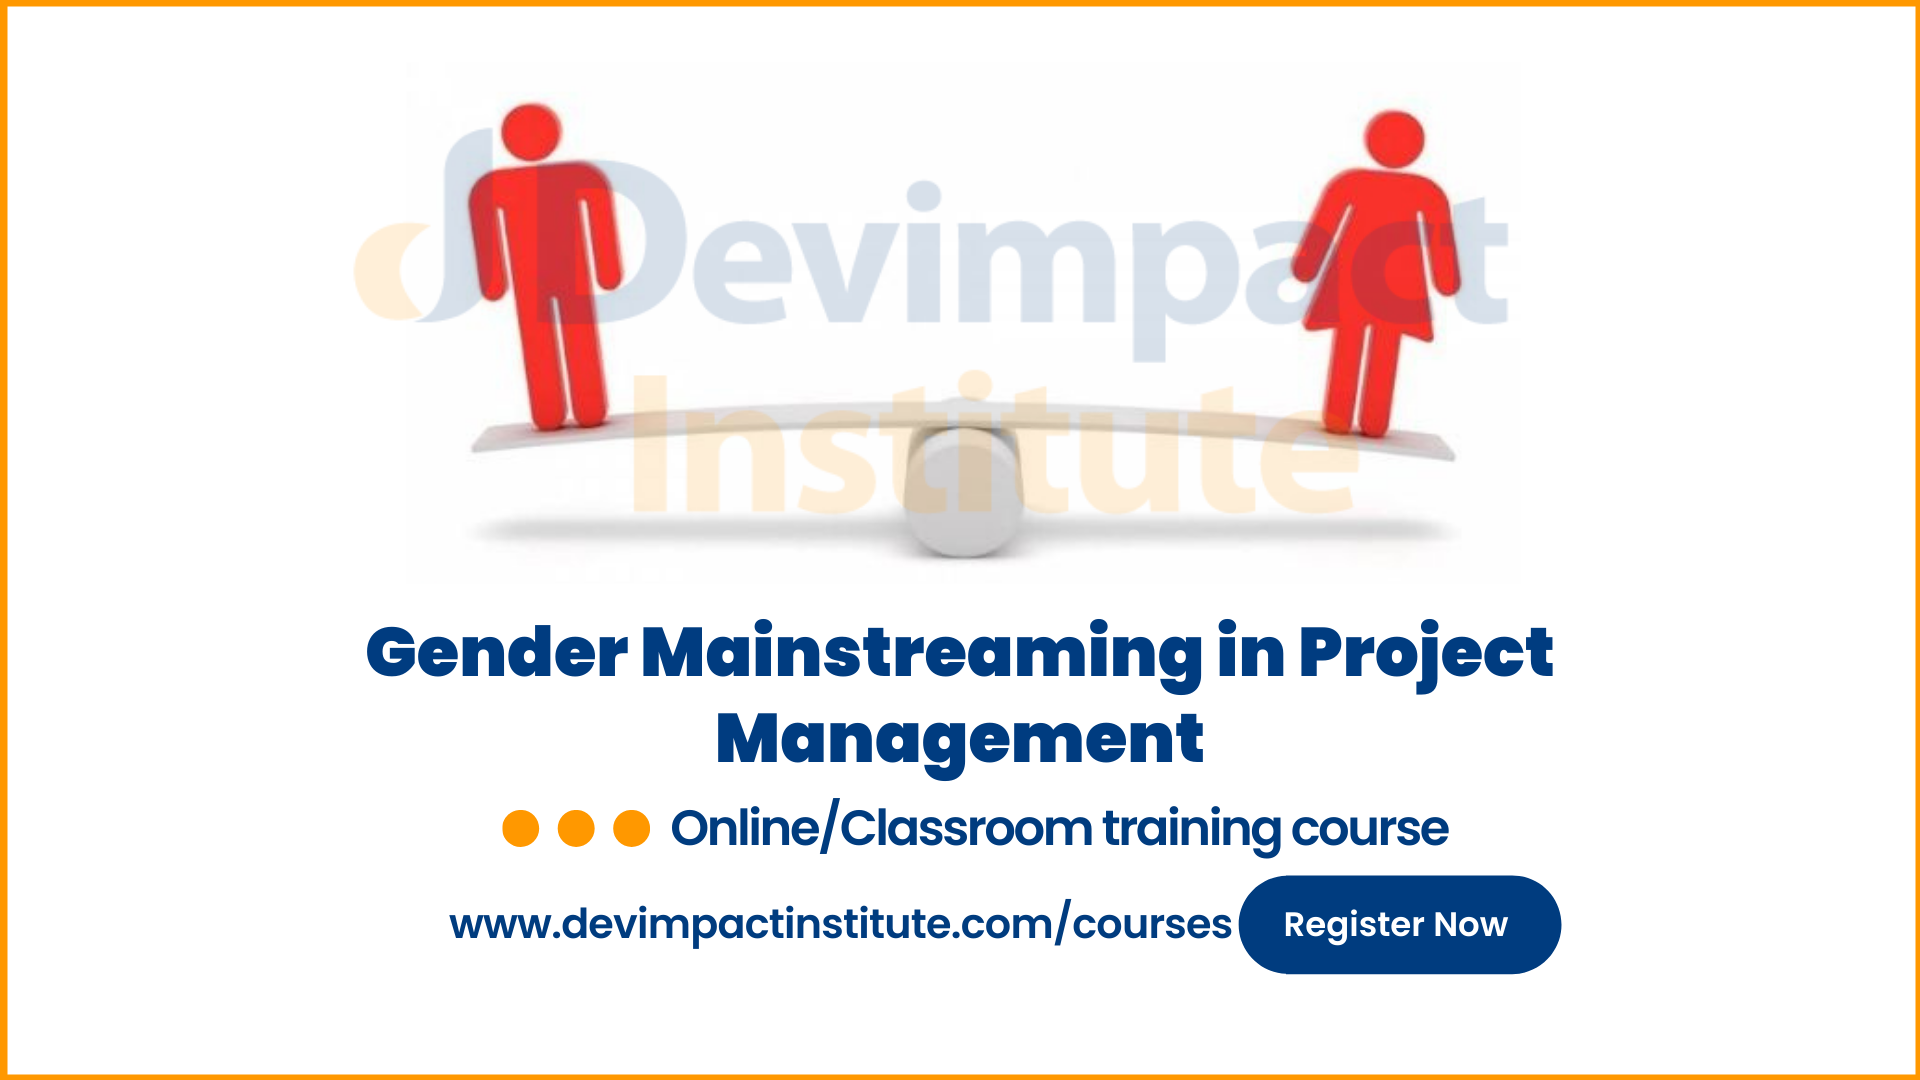 Training on Gender Mainstreaming in Project Management, Online Event